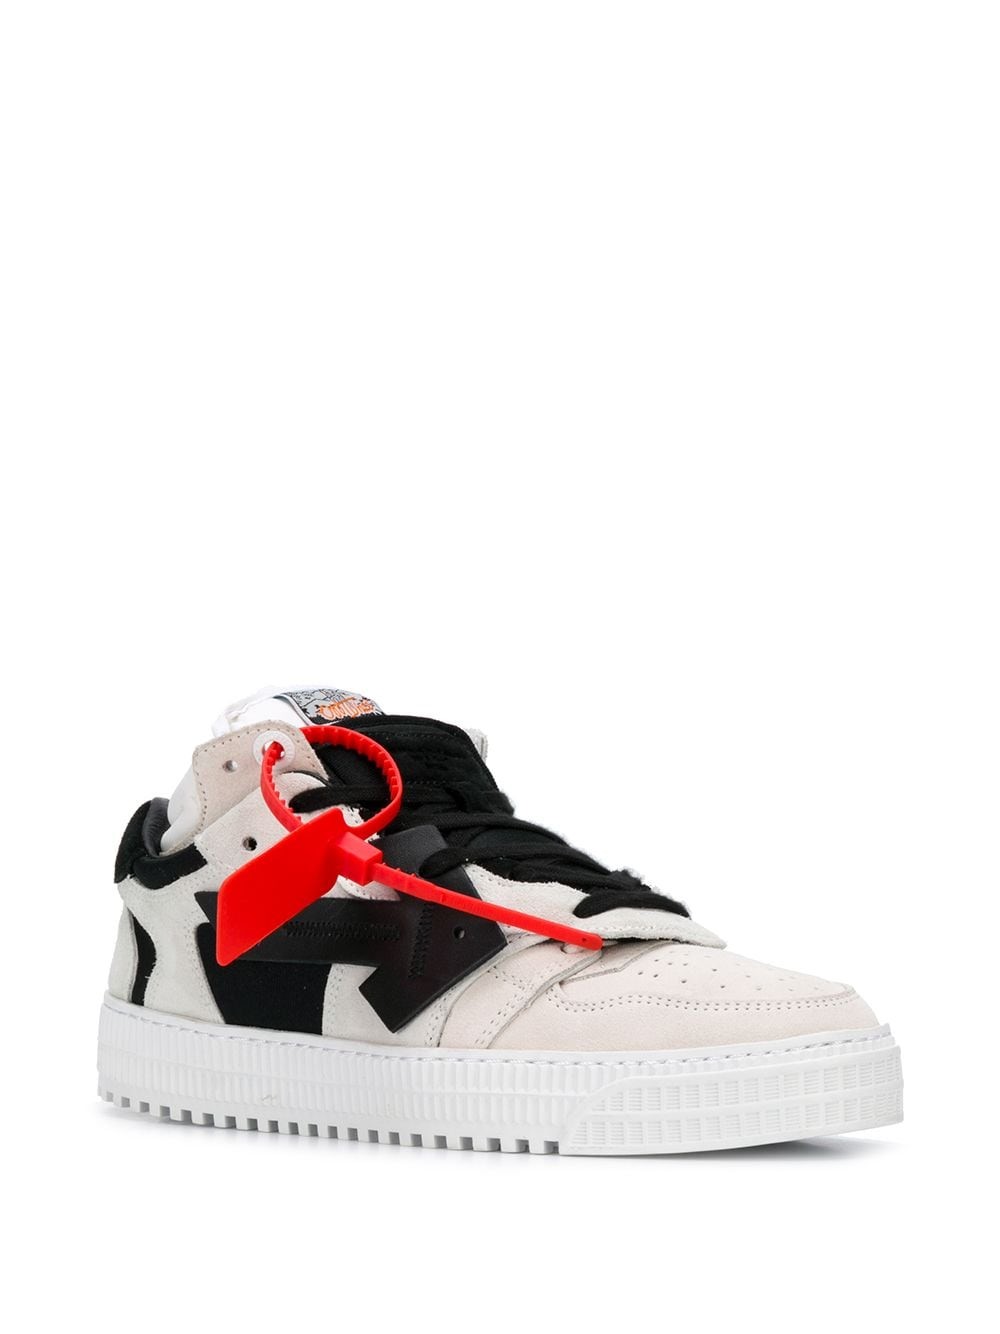 off white 4.0 low top sneakers